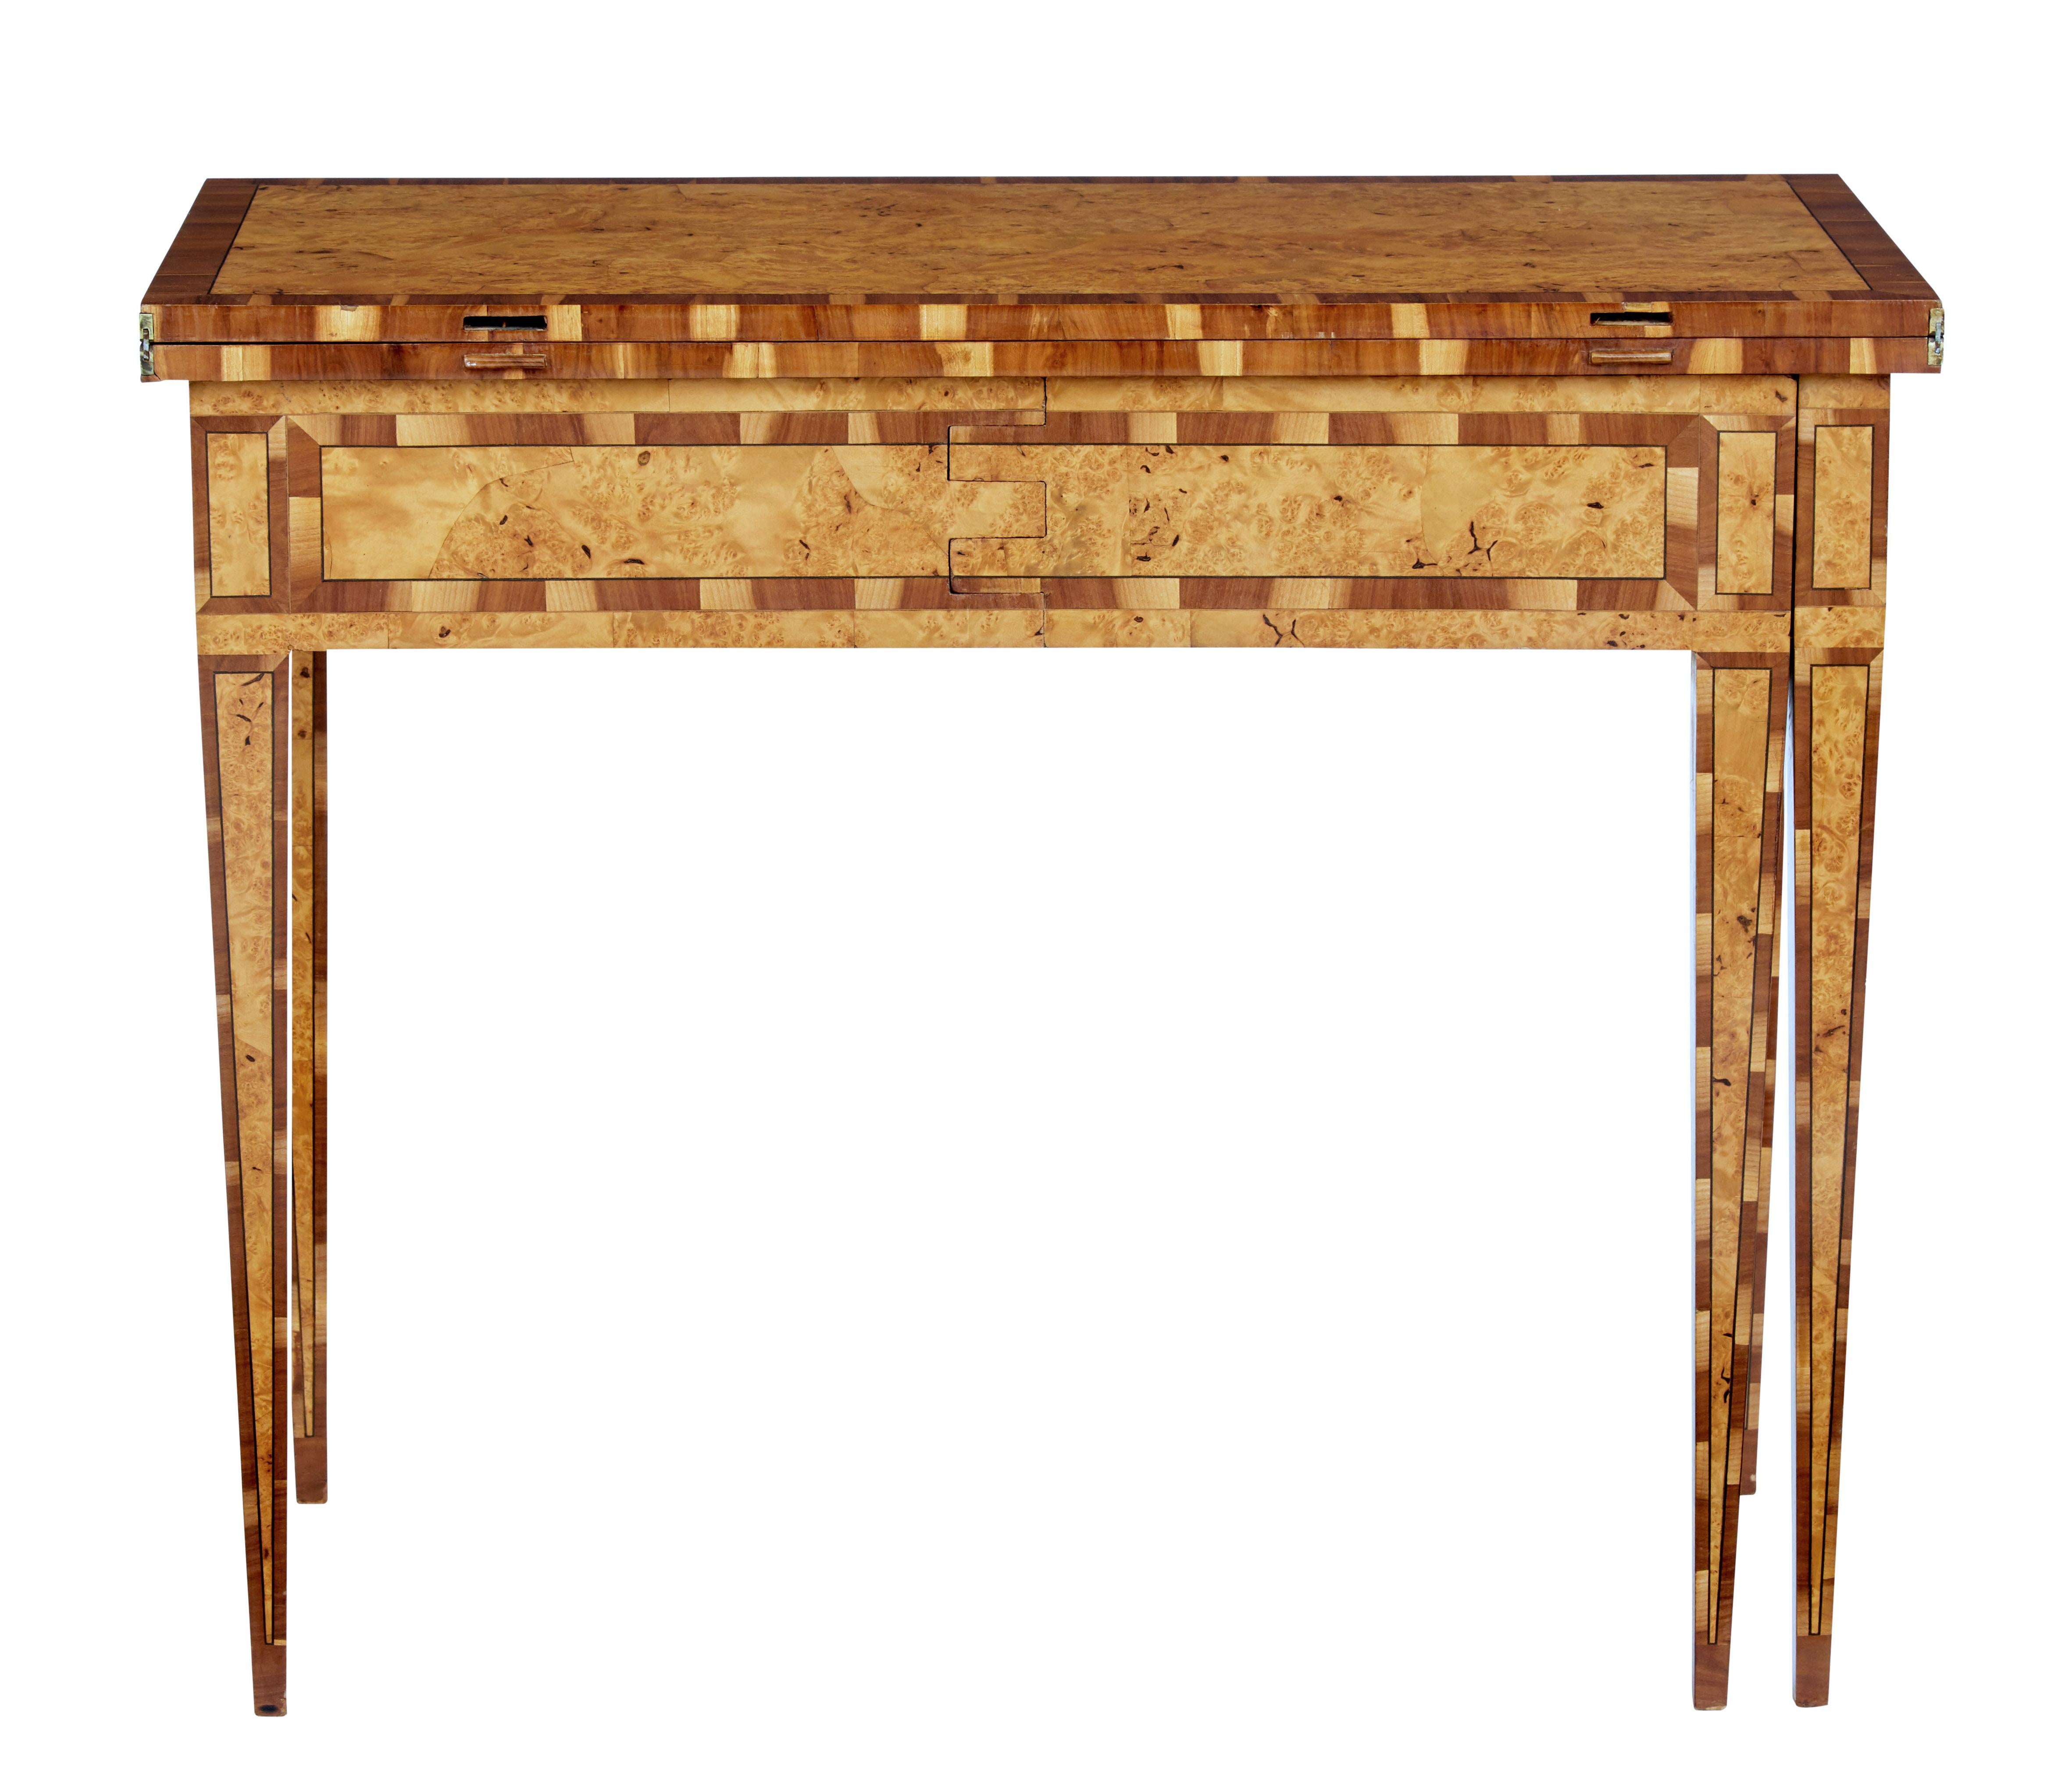 Gustavian Mid-19th Century Burr Birch and Elm Games Table